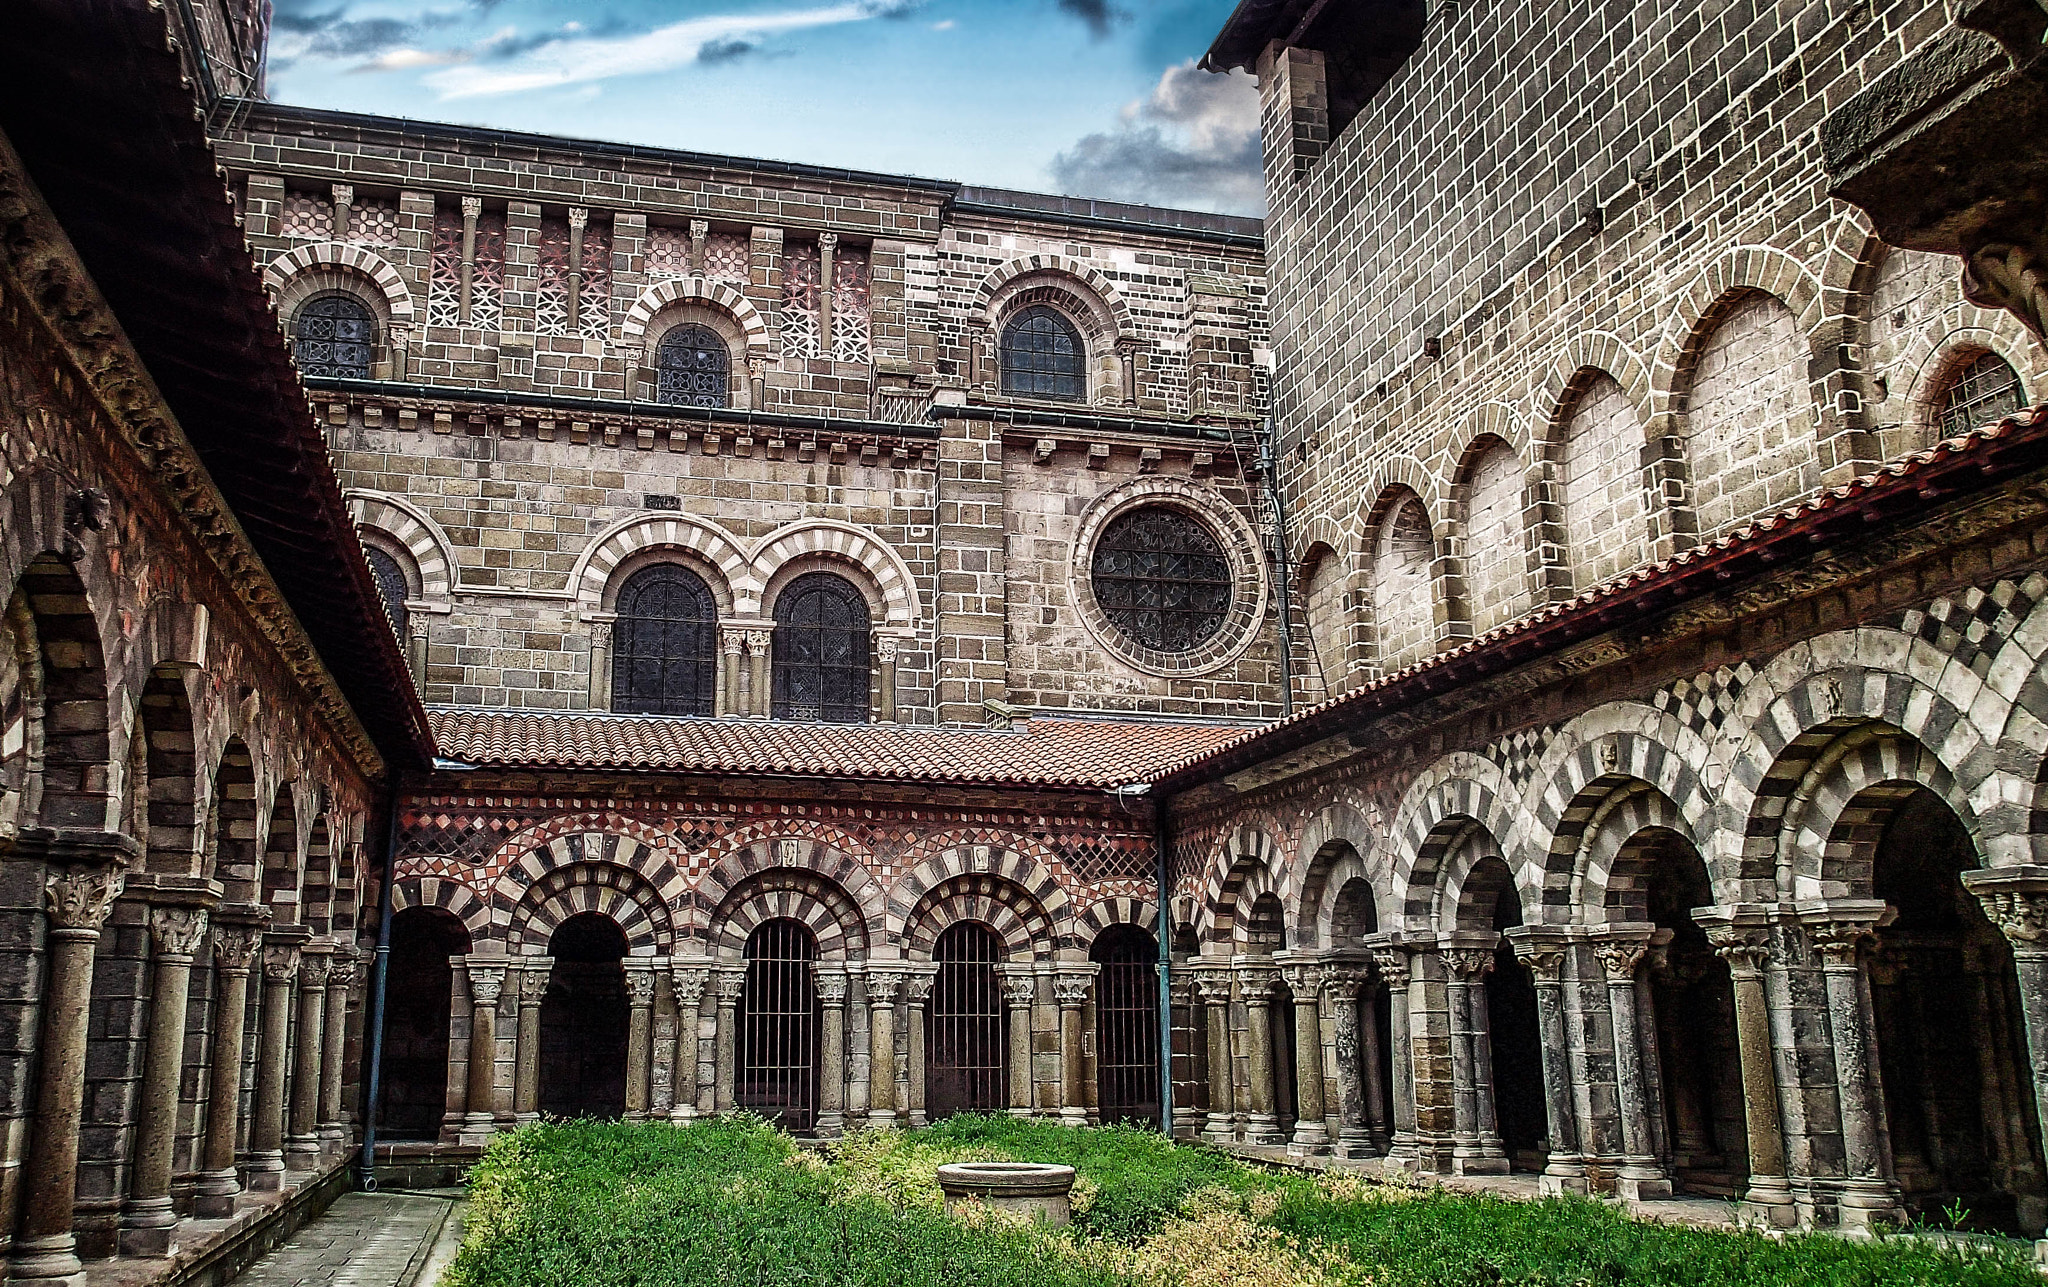 Olympus TG-1 sample photo. Cathedral cloister of le puy-en-velay (12th c) photography